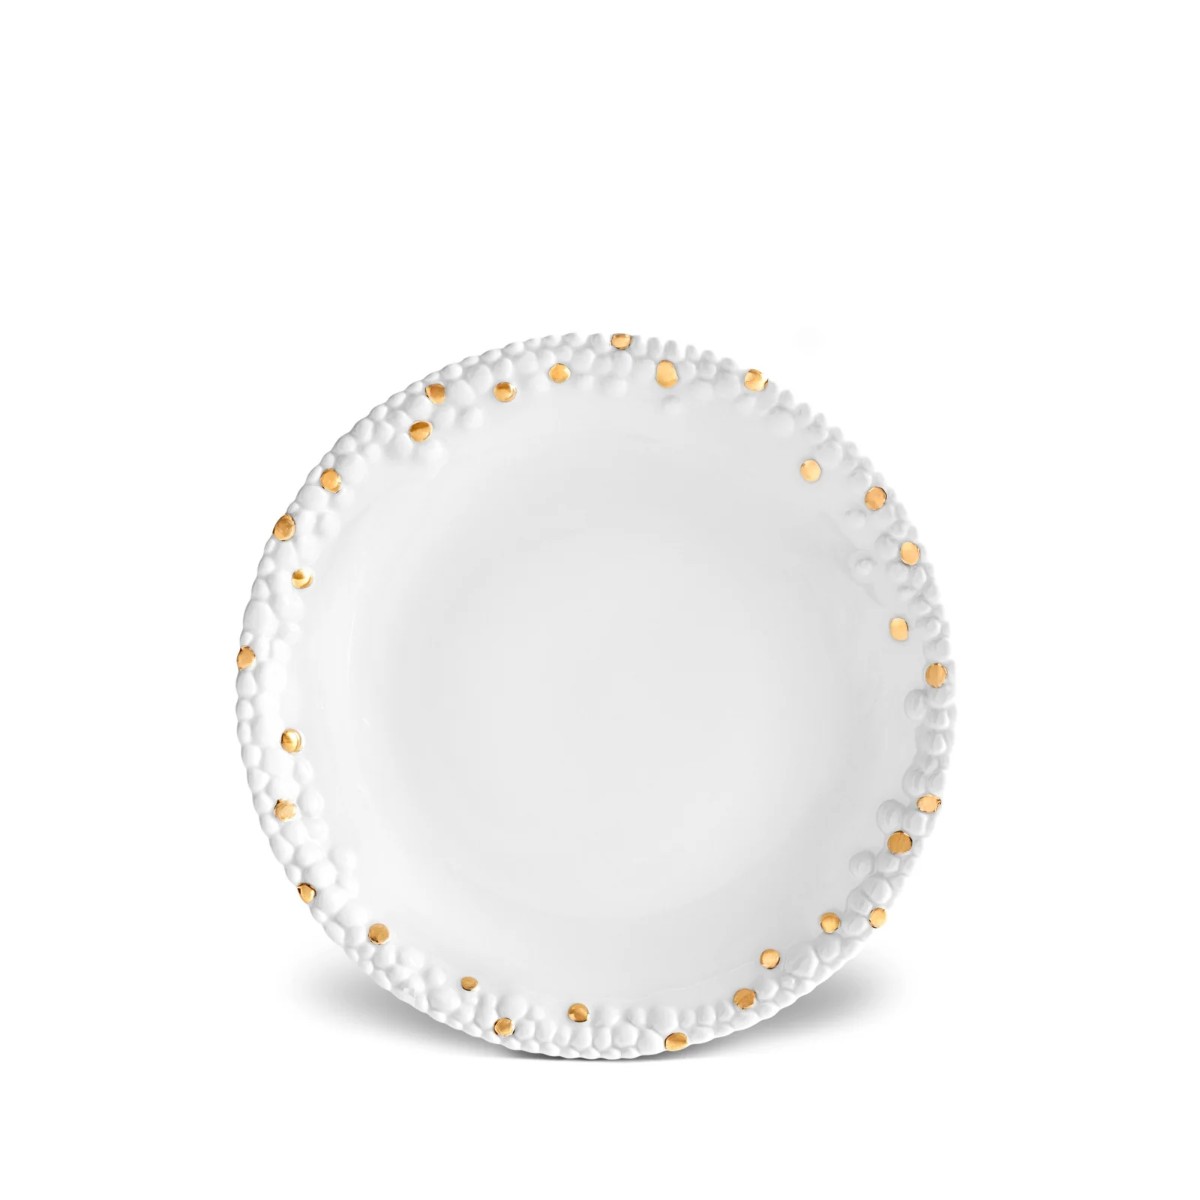 Lobjet Haas Mojave Bread Butter Plate White And Gold